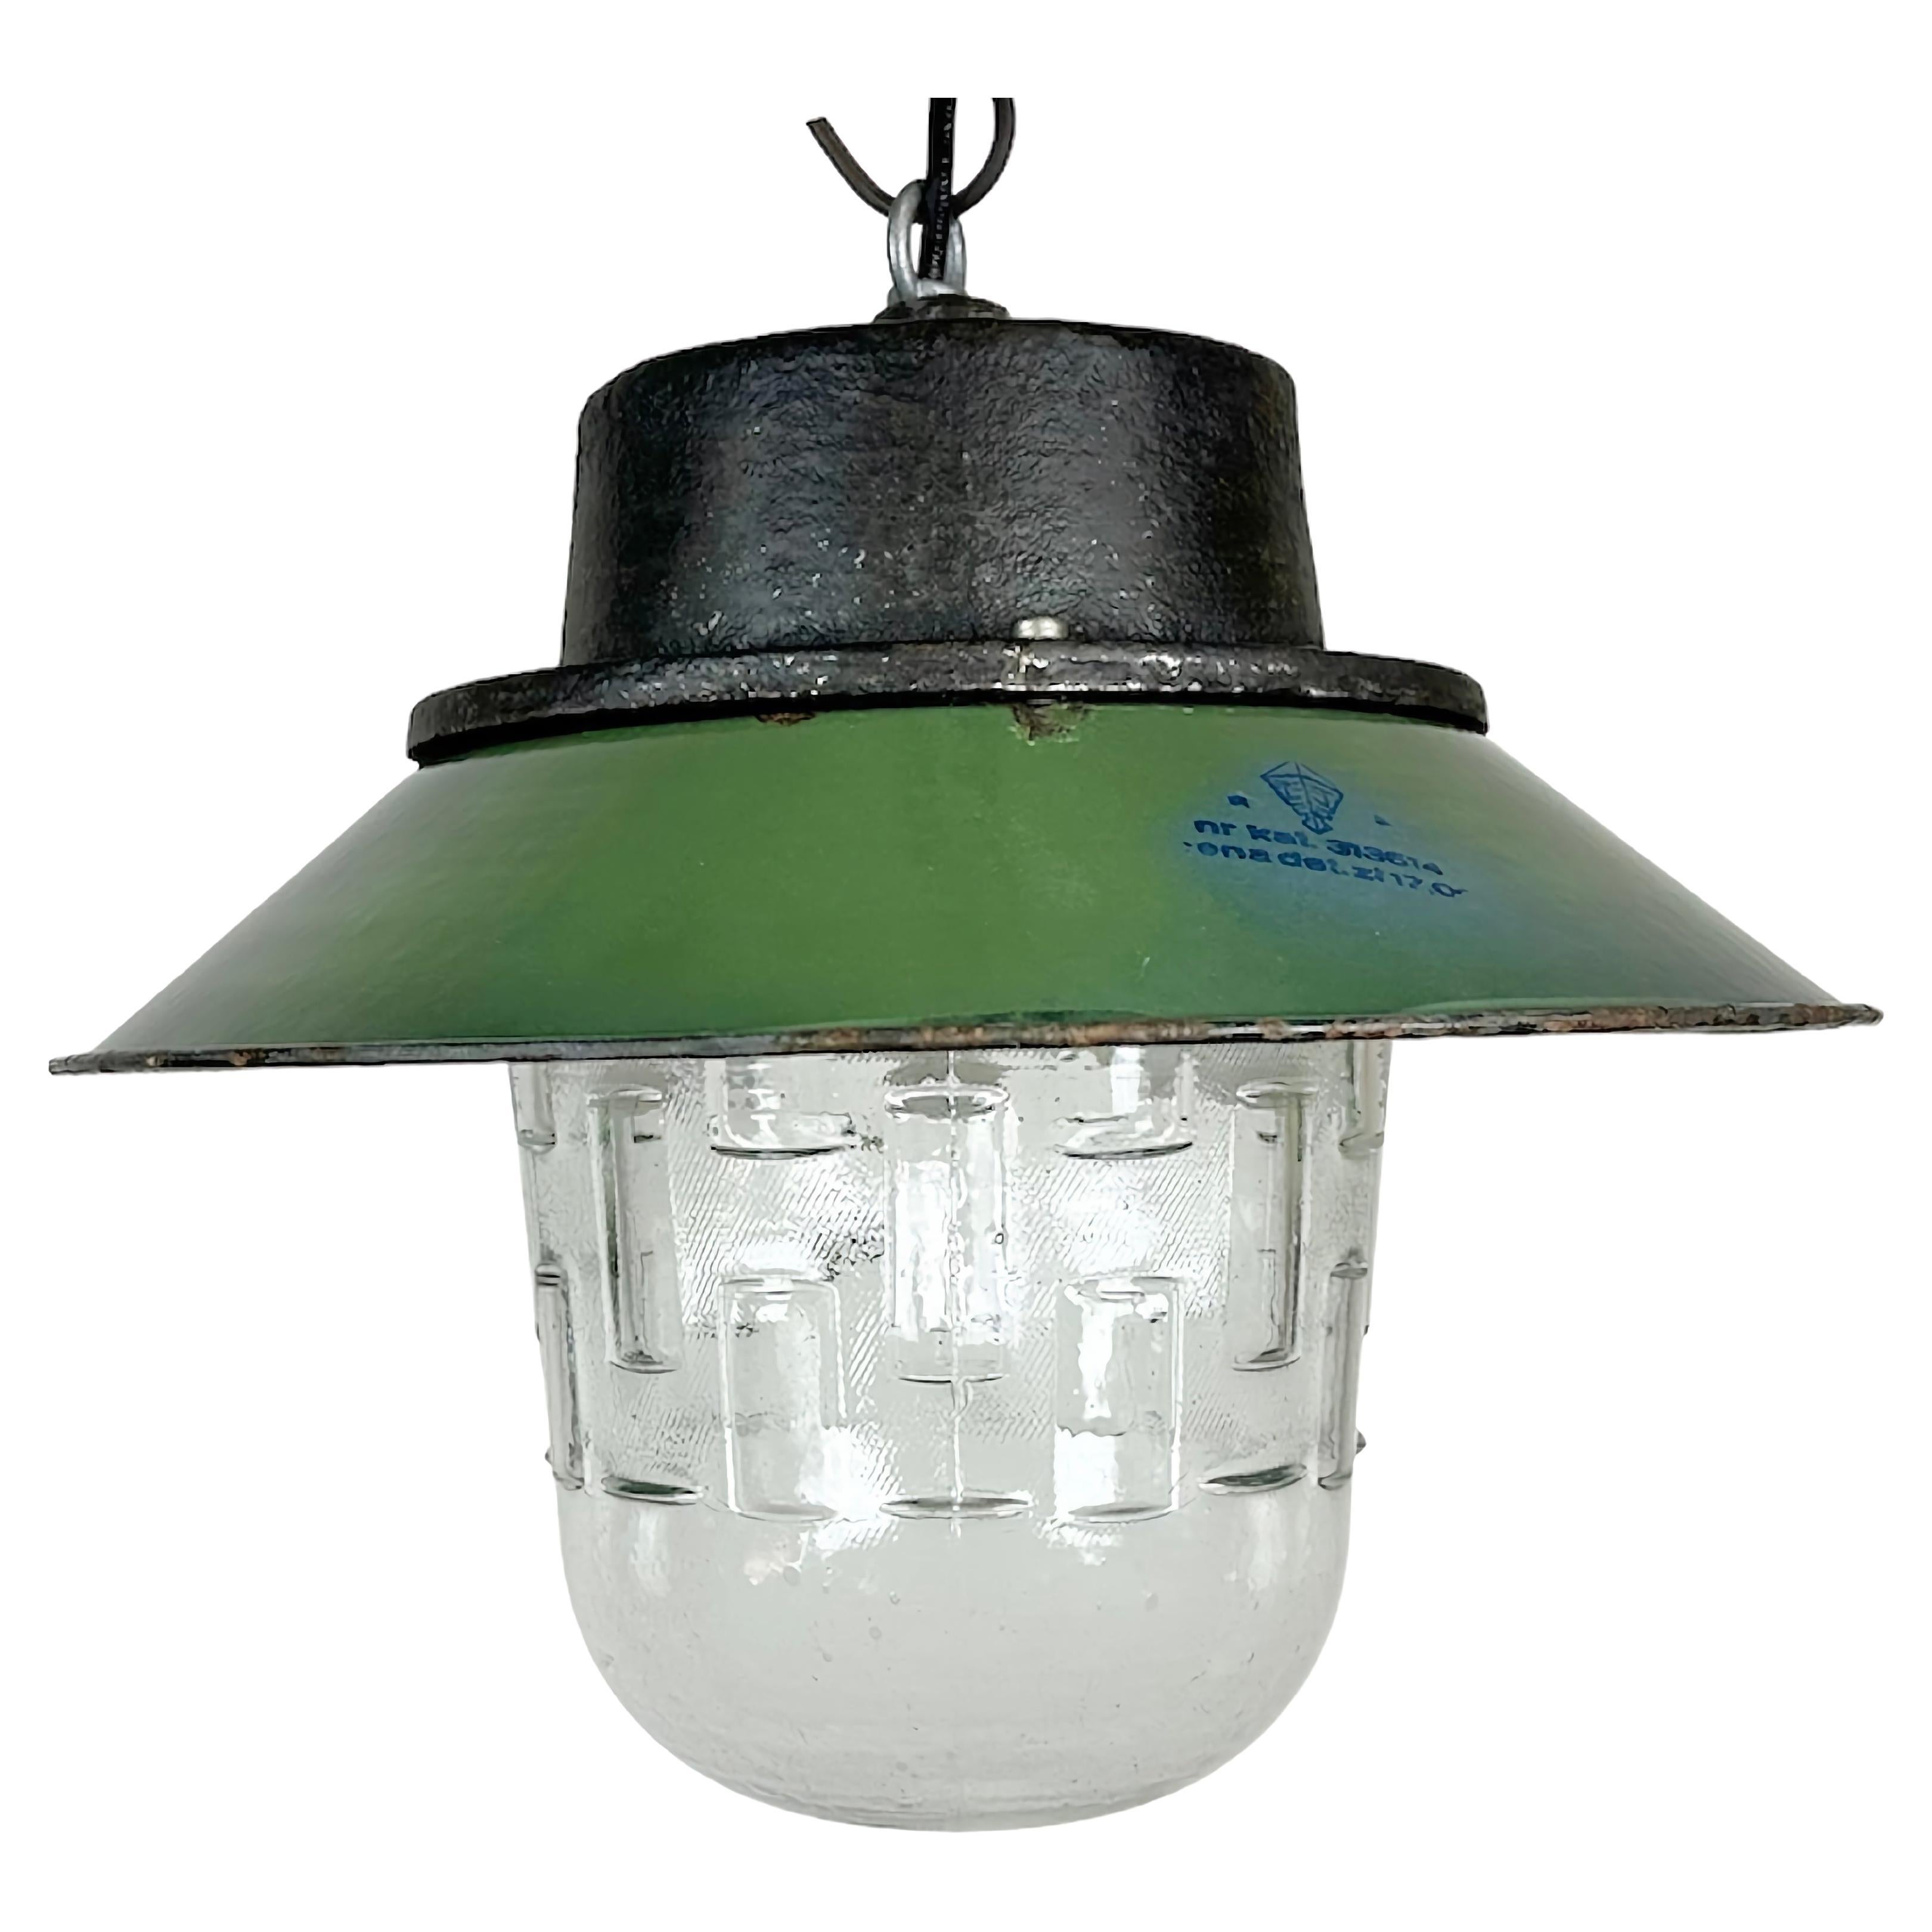 Green Enamel and Cast Iron Industrial Pendant Light, 1960s For Sale